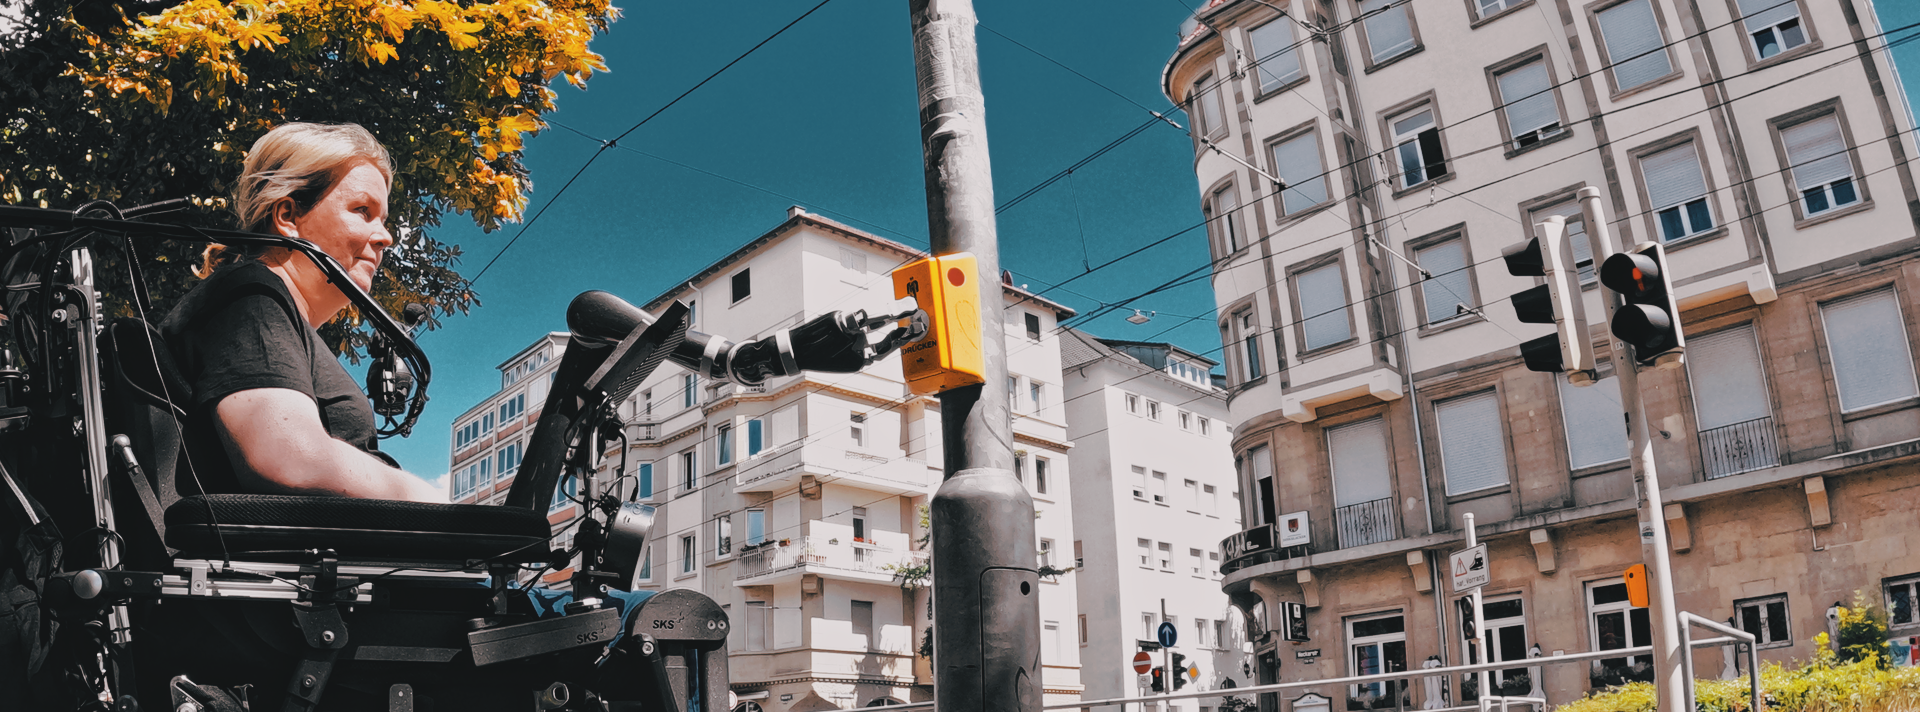 Woman uses Jaco to press a walk signal button at a crosswalk